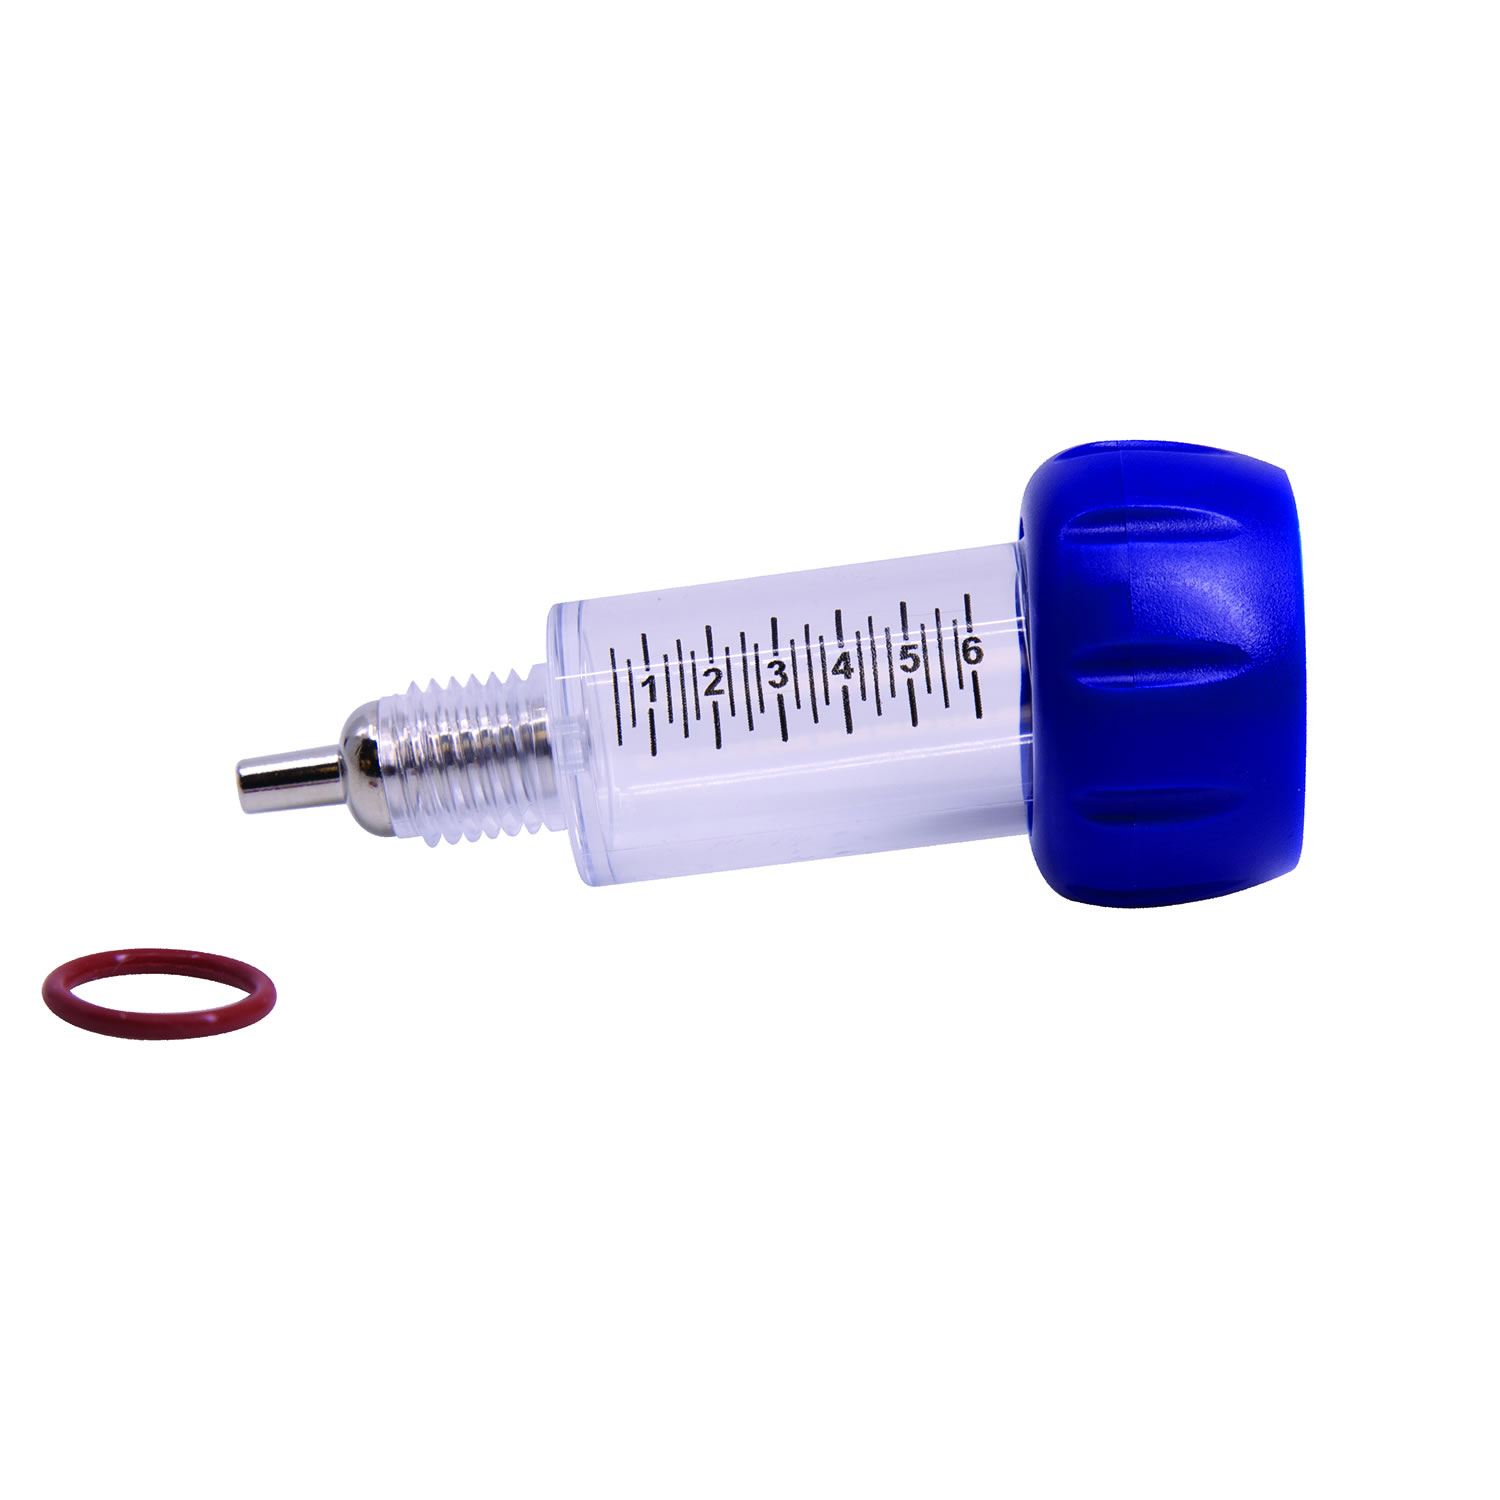 NEOGEN BARREL WITH O-RING FOR VACCINATOR